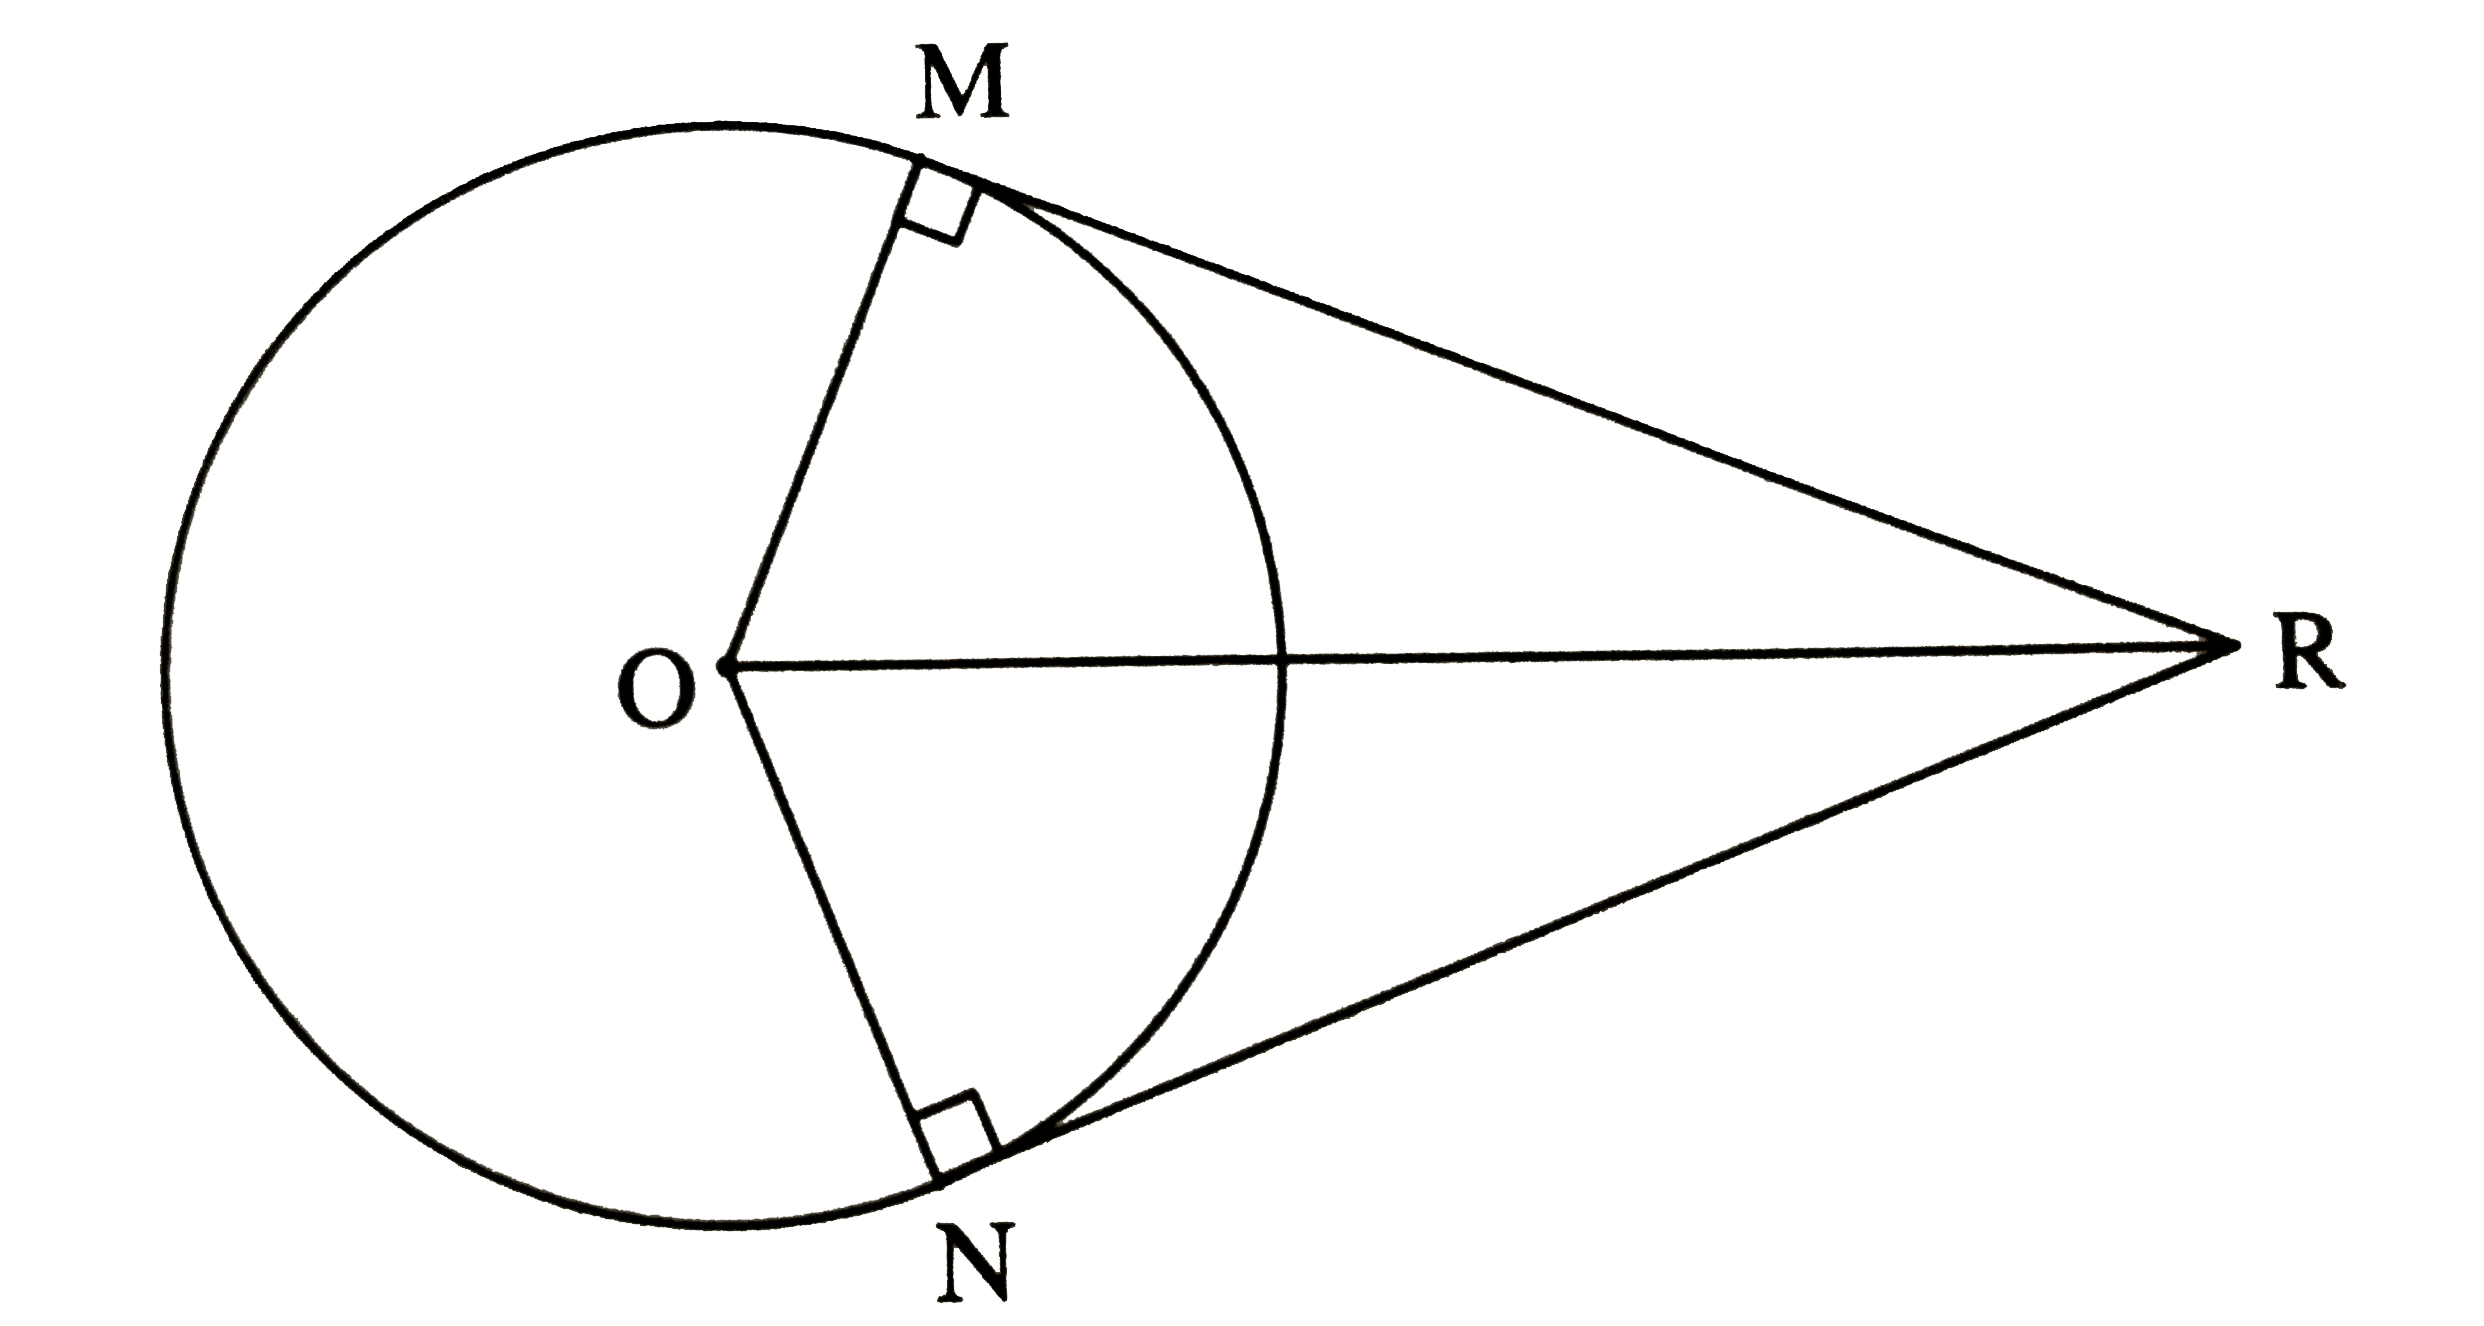 Seg RM and seg RN are tangent segments of a circle with centre O. Prove that seg OR bisects /MRN as well as /MON.